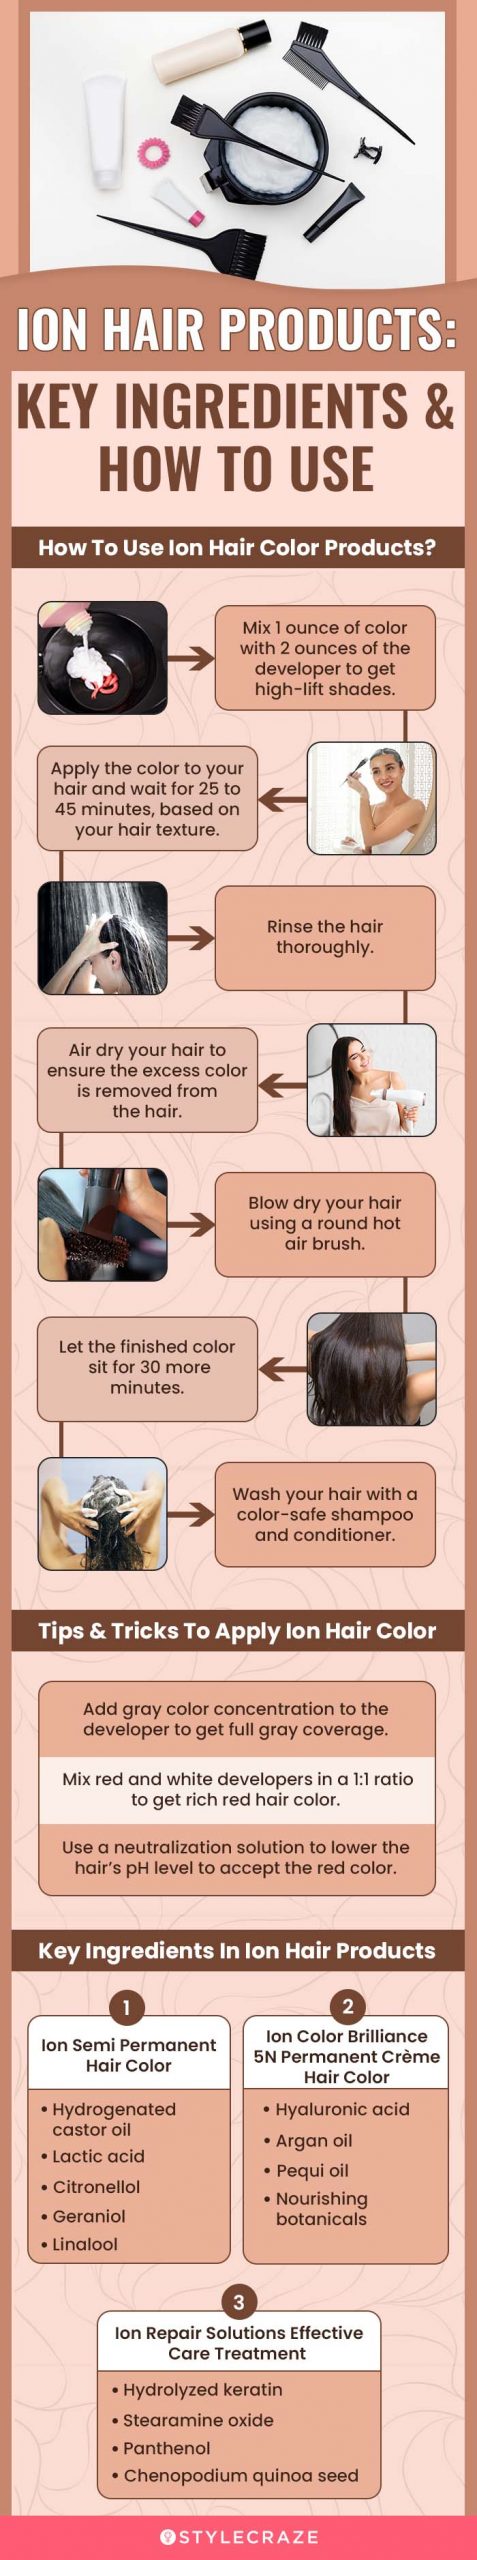 Ion Hair Products: Key Ingredients & How To Use (infographic)